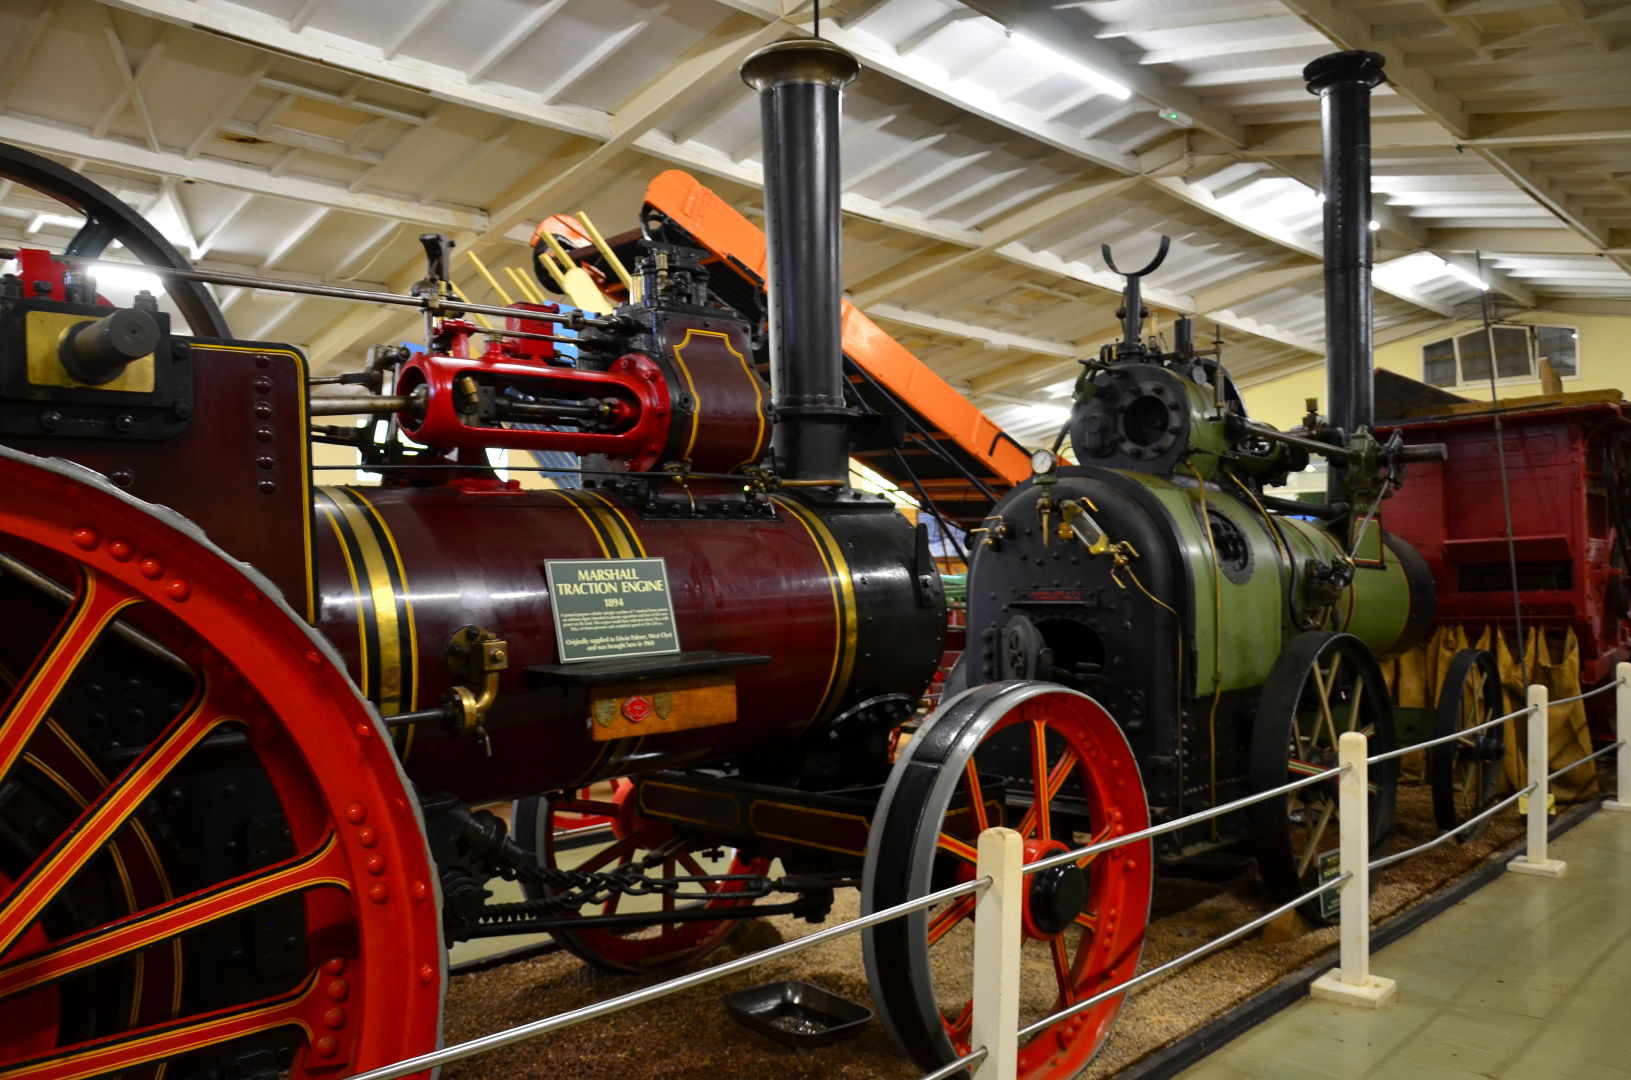 Traction engines in a museum